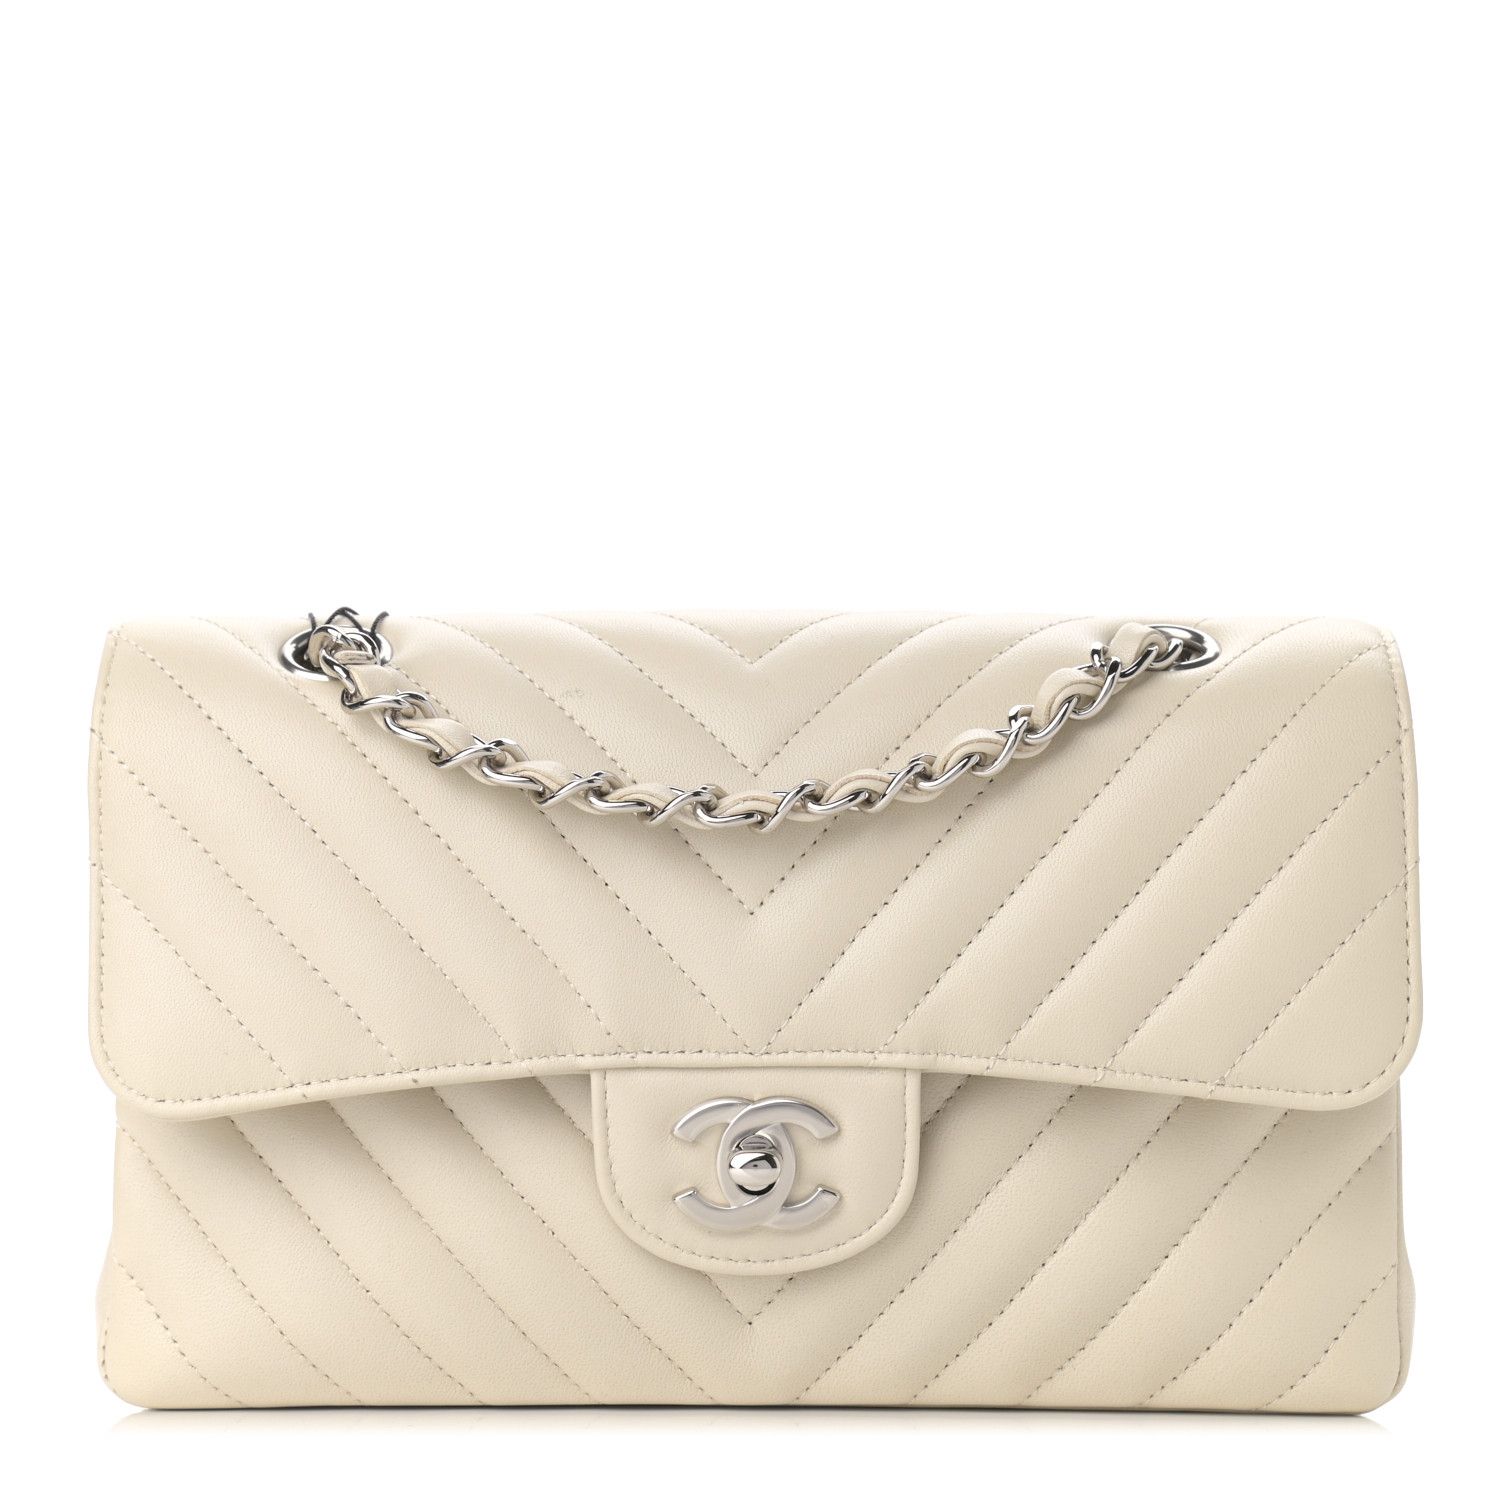 CHANEL Lambskin Chevron Quilted Small Double Flap White | FASHIONPHILE | Fashionphile